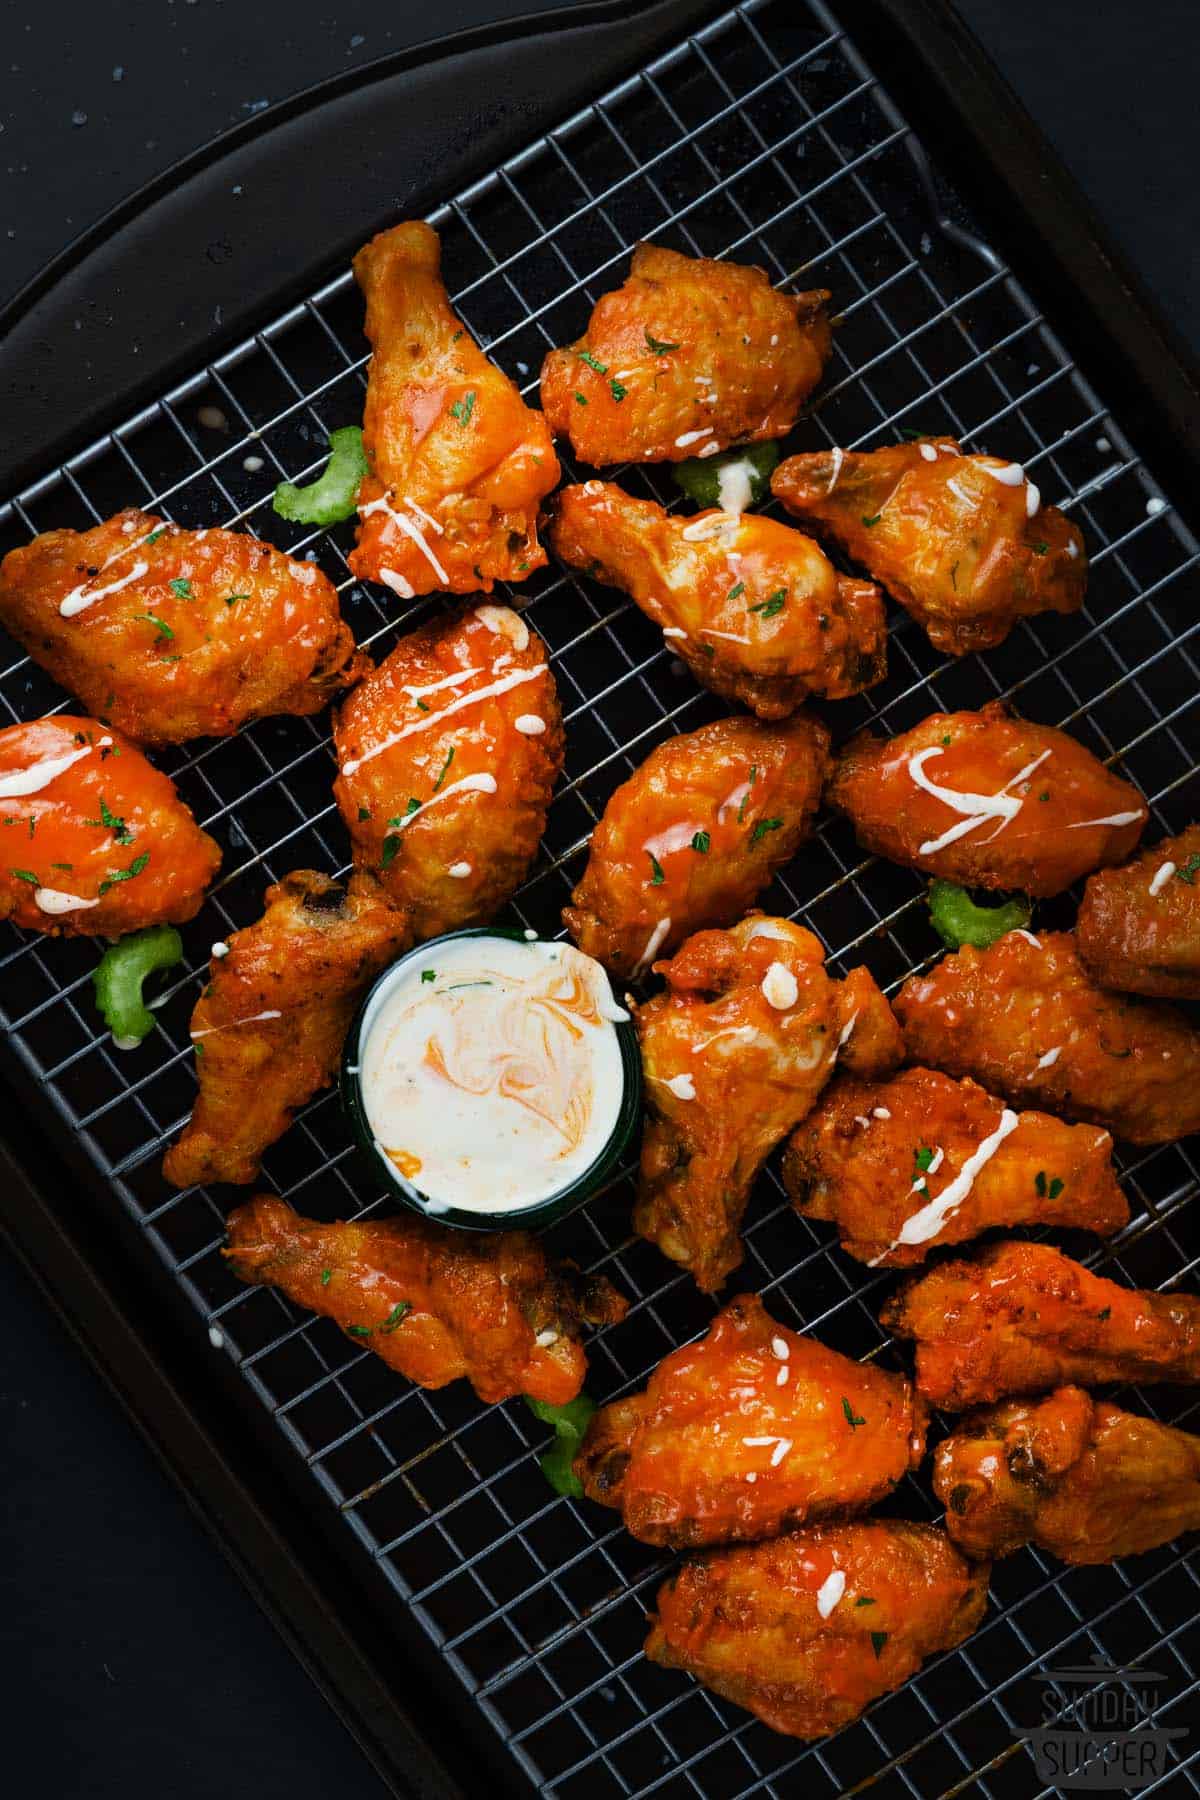 buffalo wings next to blue cheese dip on a baking tray drizzled with dressing